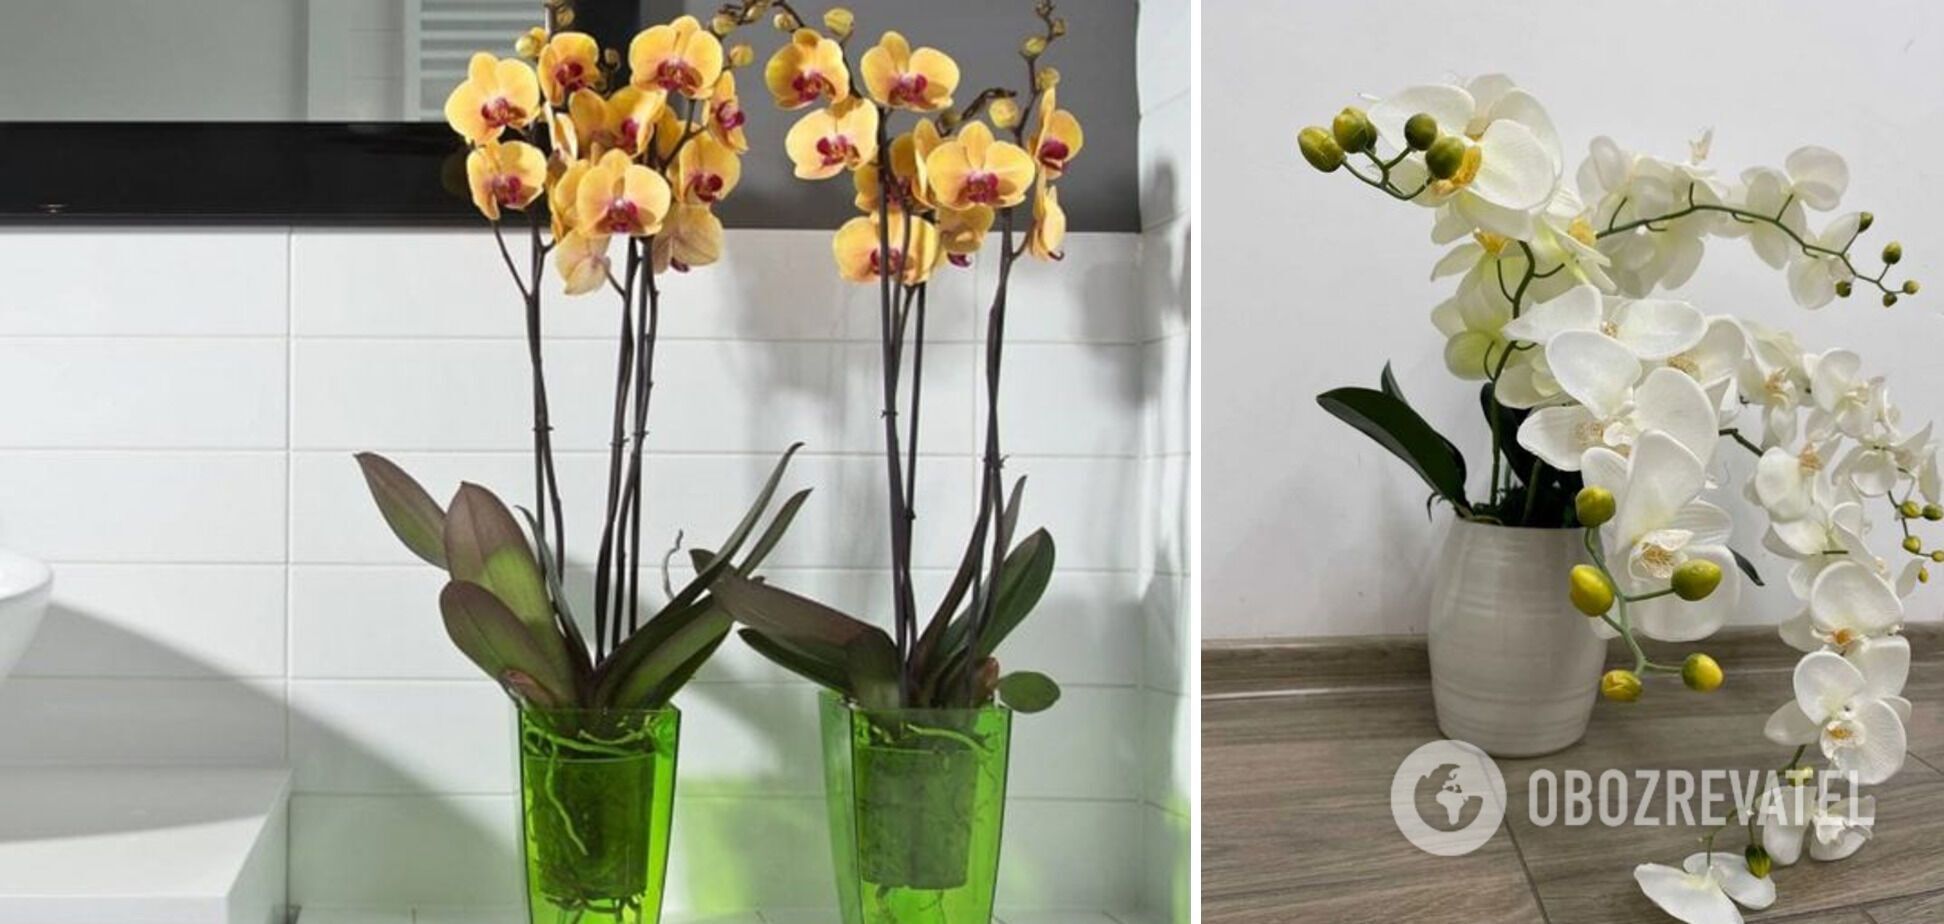 Orchid will grow faster: which pot is best to choose for the flower